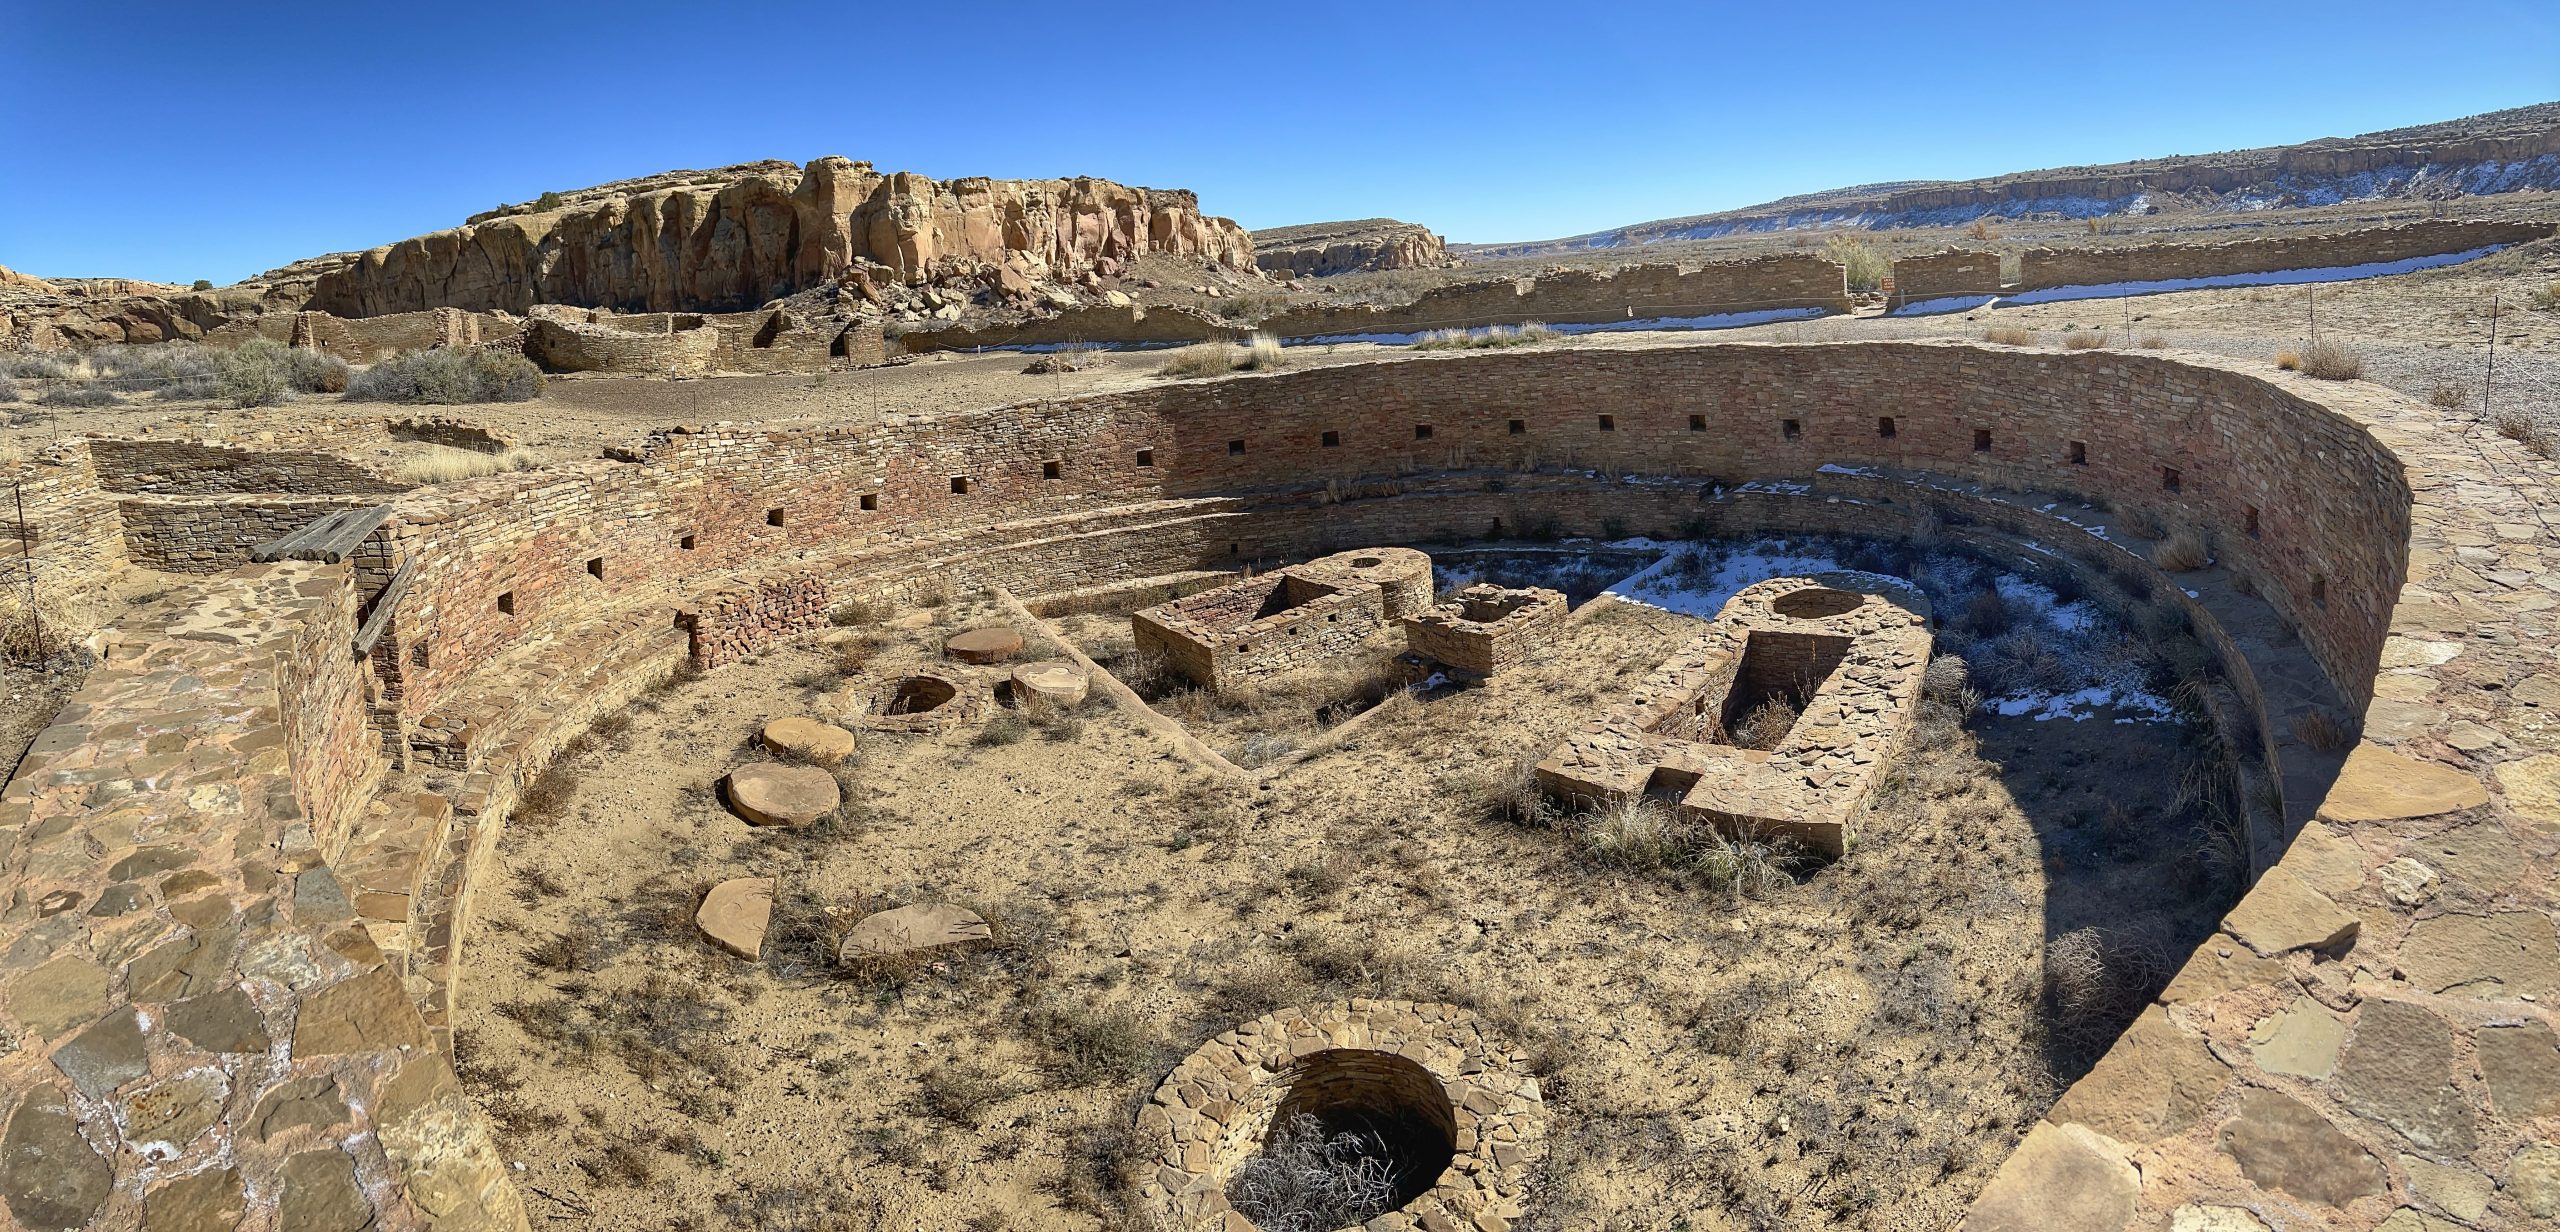 New Mexicans Urge Biden Administration to Protect Lands Surrounding Chaco Canyon From Oil and Gas Drilling Until Congress Passes Legislation to Provide Permanent Protection - New Mexico Wilderness Alliance